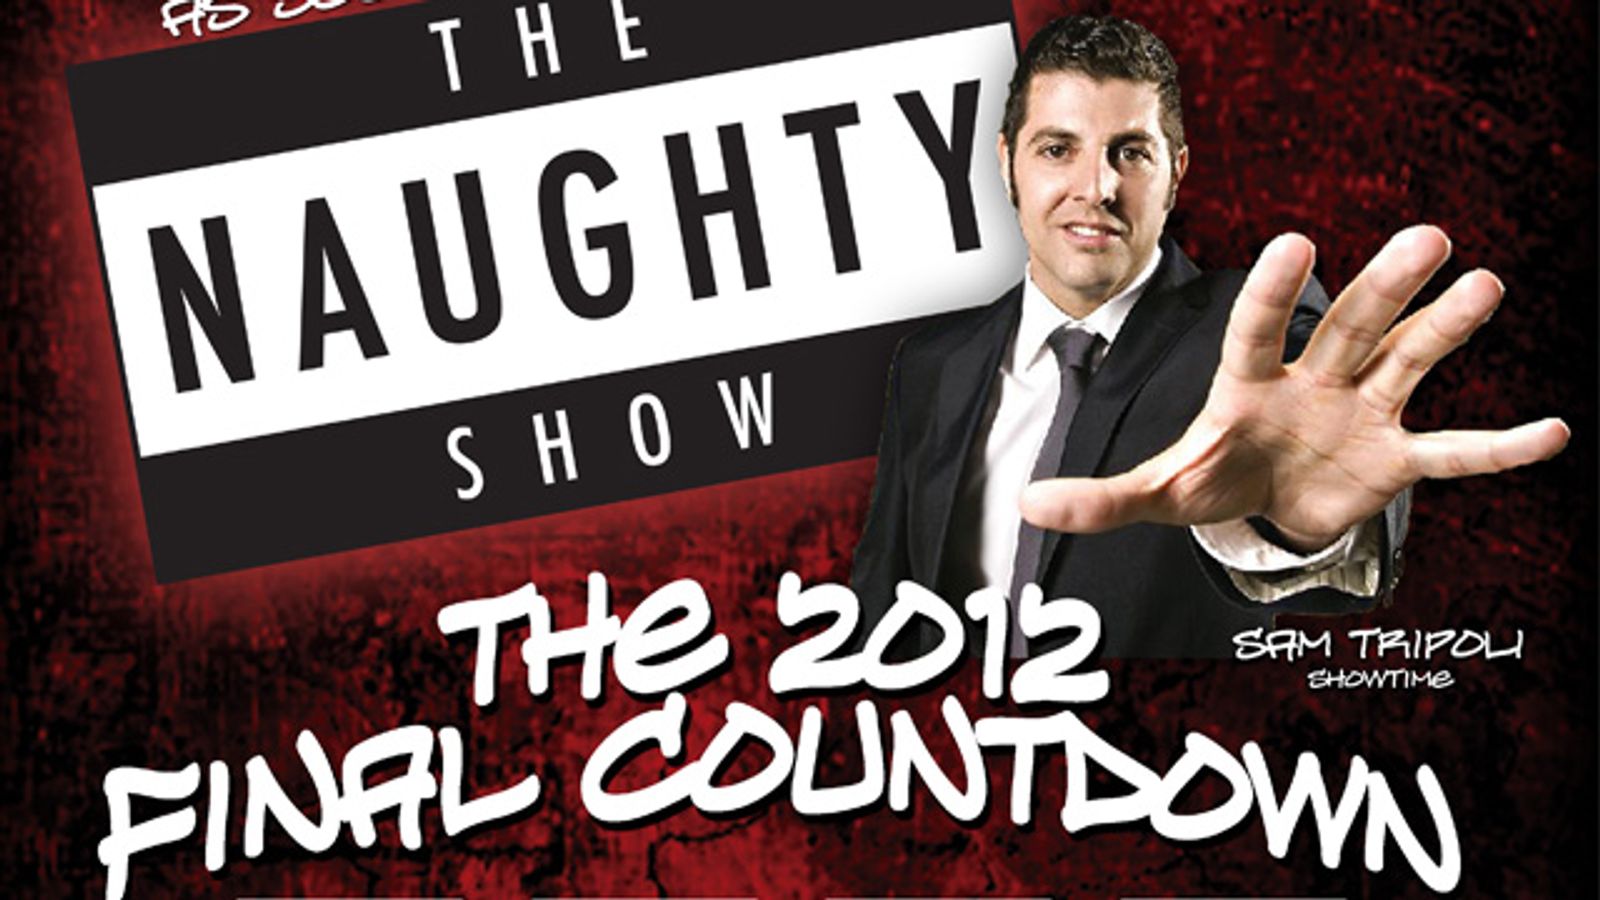 The Naughty Show Features Joanna Angel Nov. 15